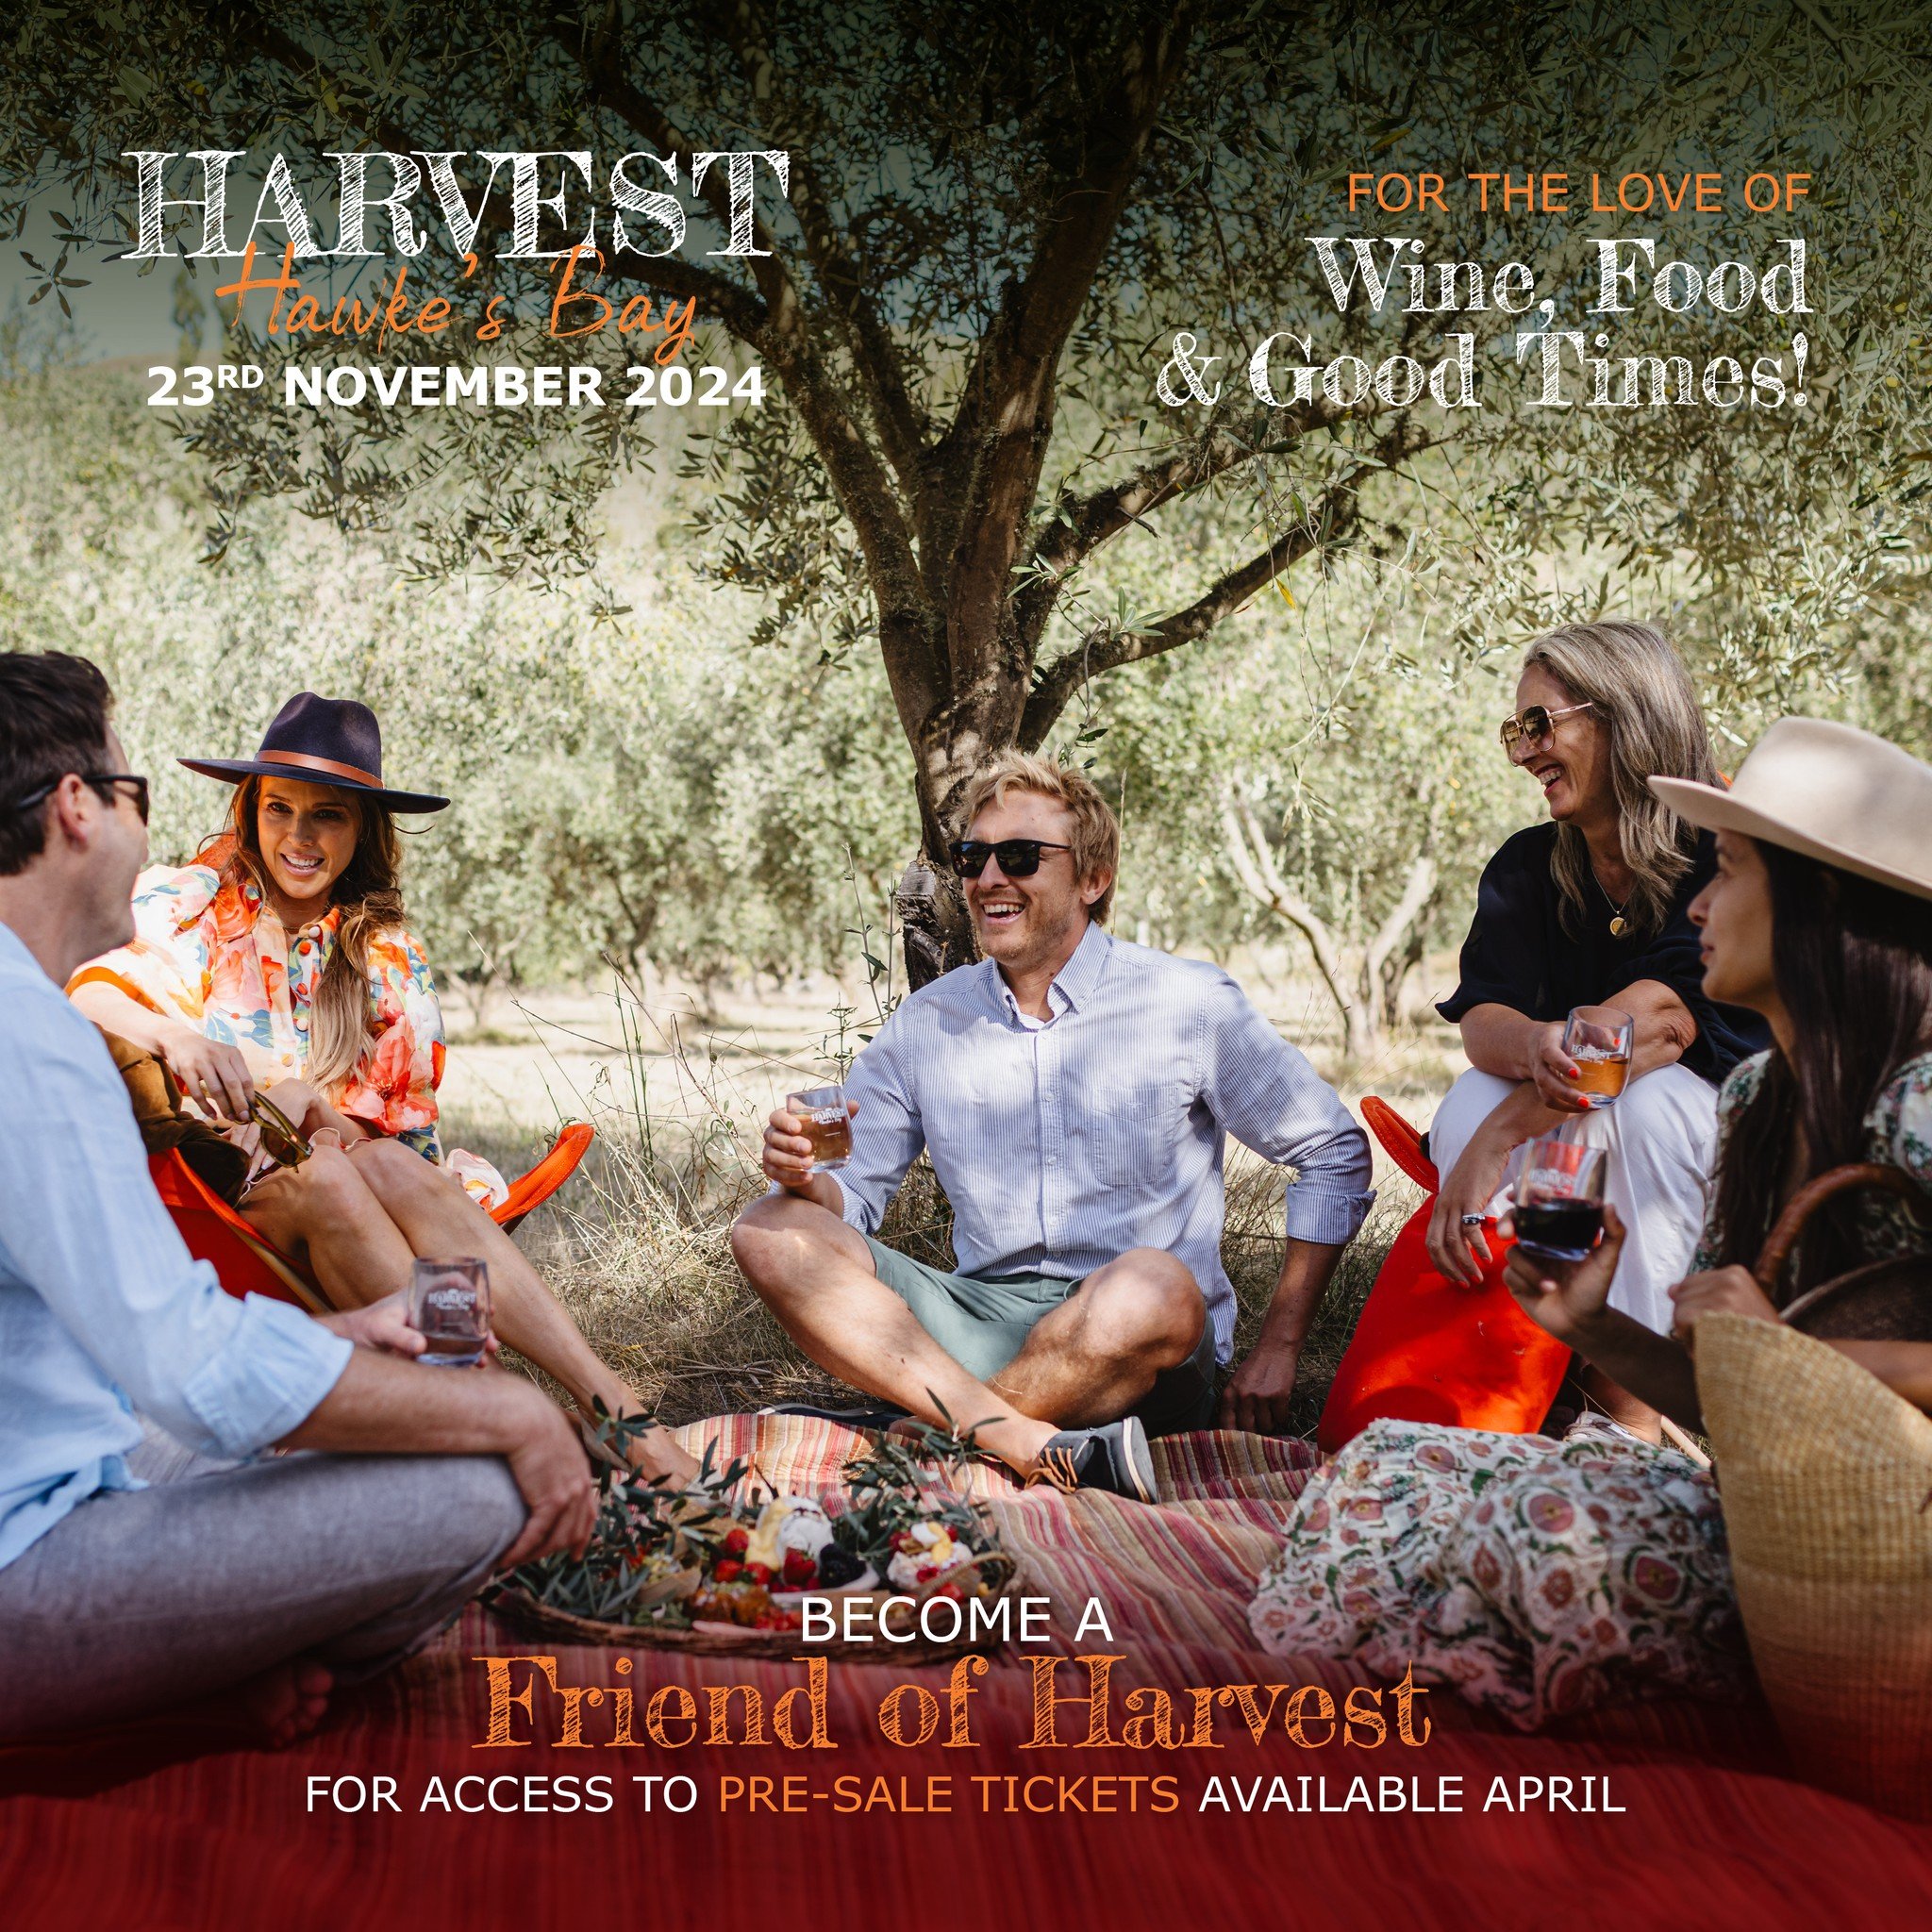 The excitement is building as we approach the much-anticipated release of the 'Friends of Harvest' strictly limited, discounted, pre-sale tickets later this week. It's been incredible to witness the enthusiasm pouring in from all corners, as friends 